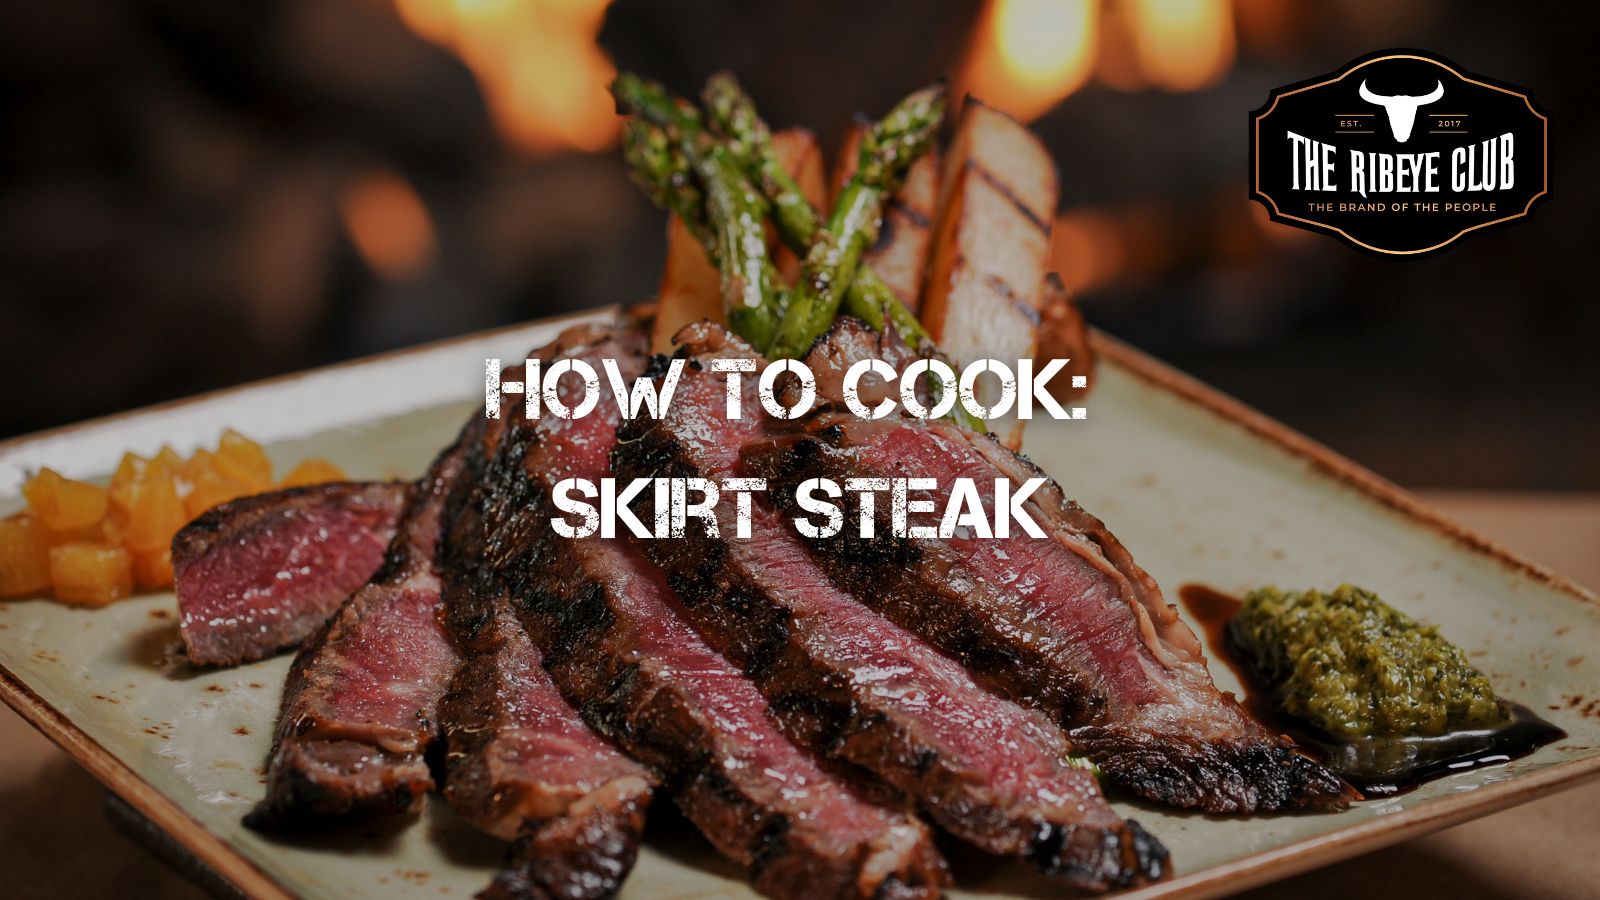 How to Cook: Skirt Steak
(Grilled with Jack Daniel's BBQ Sauce)